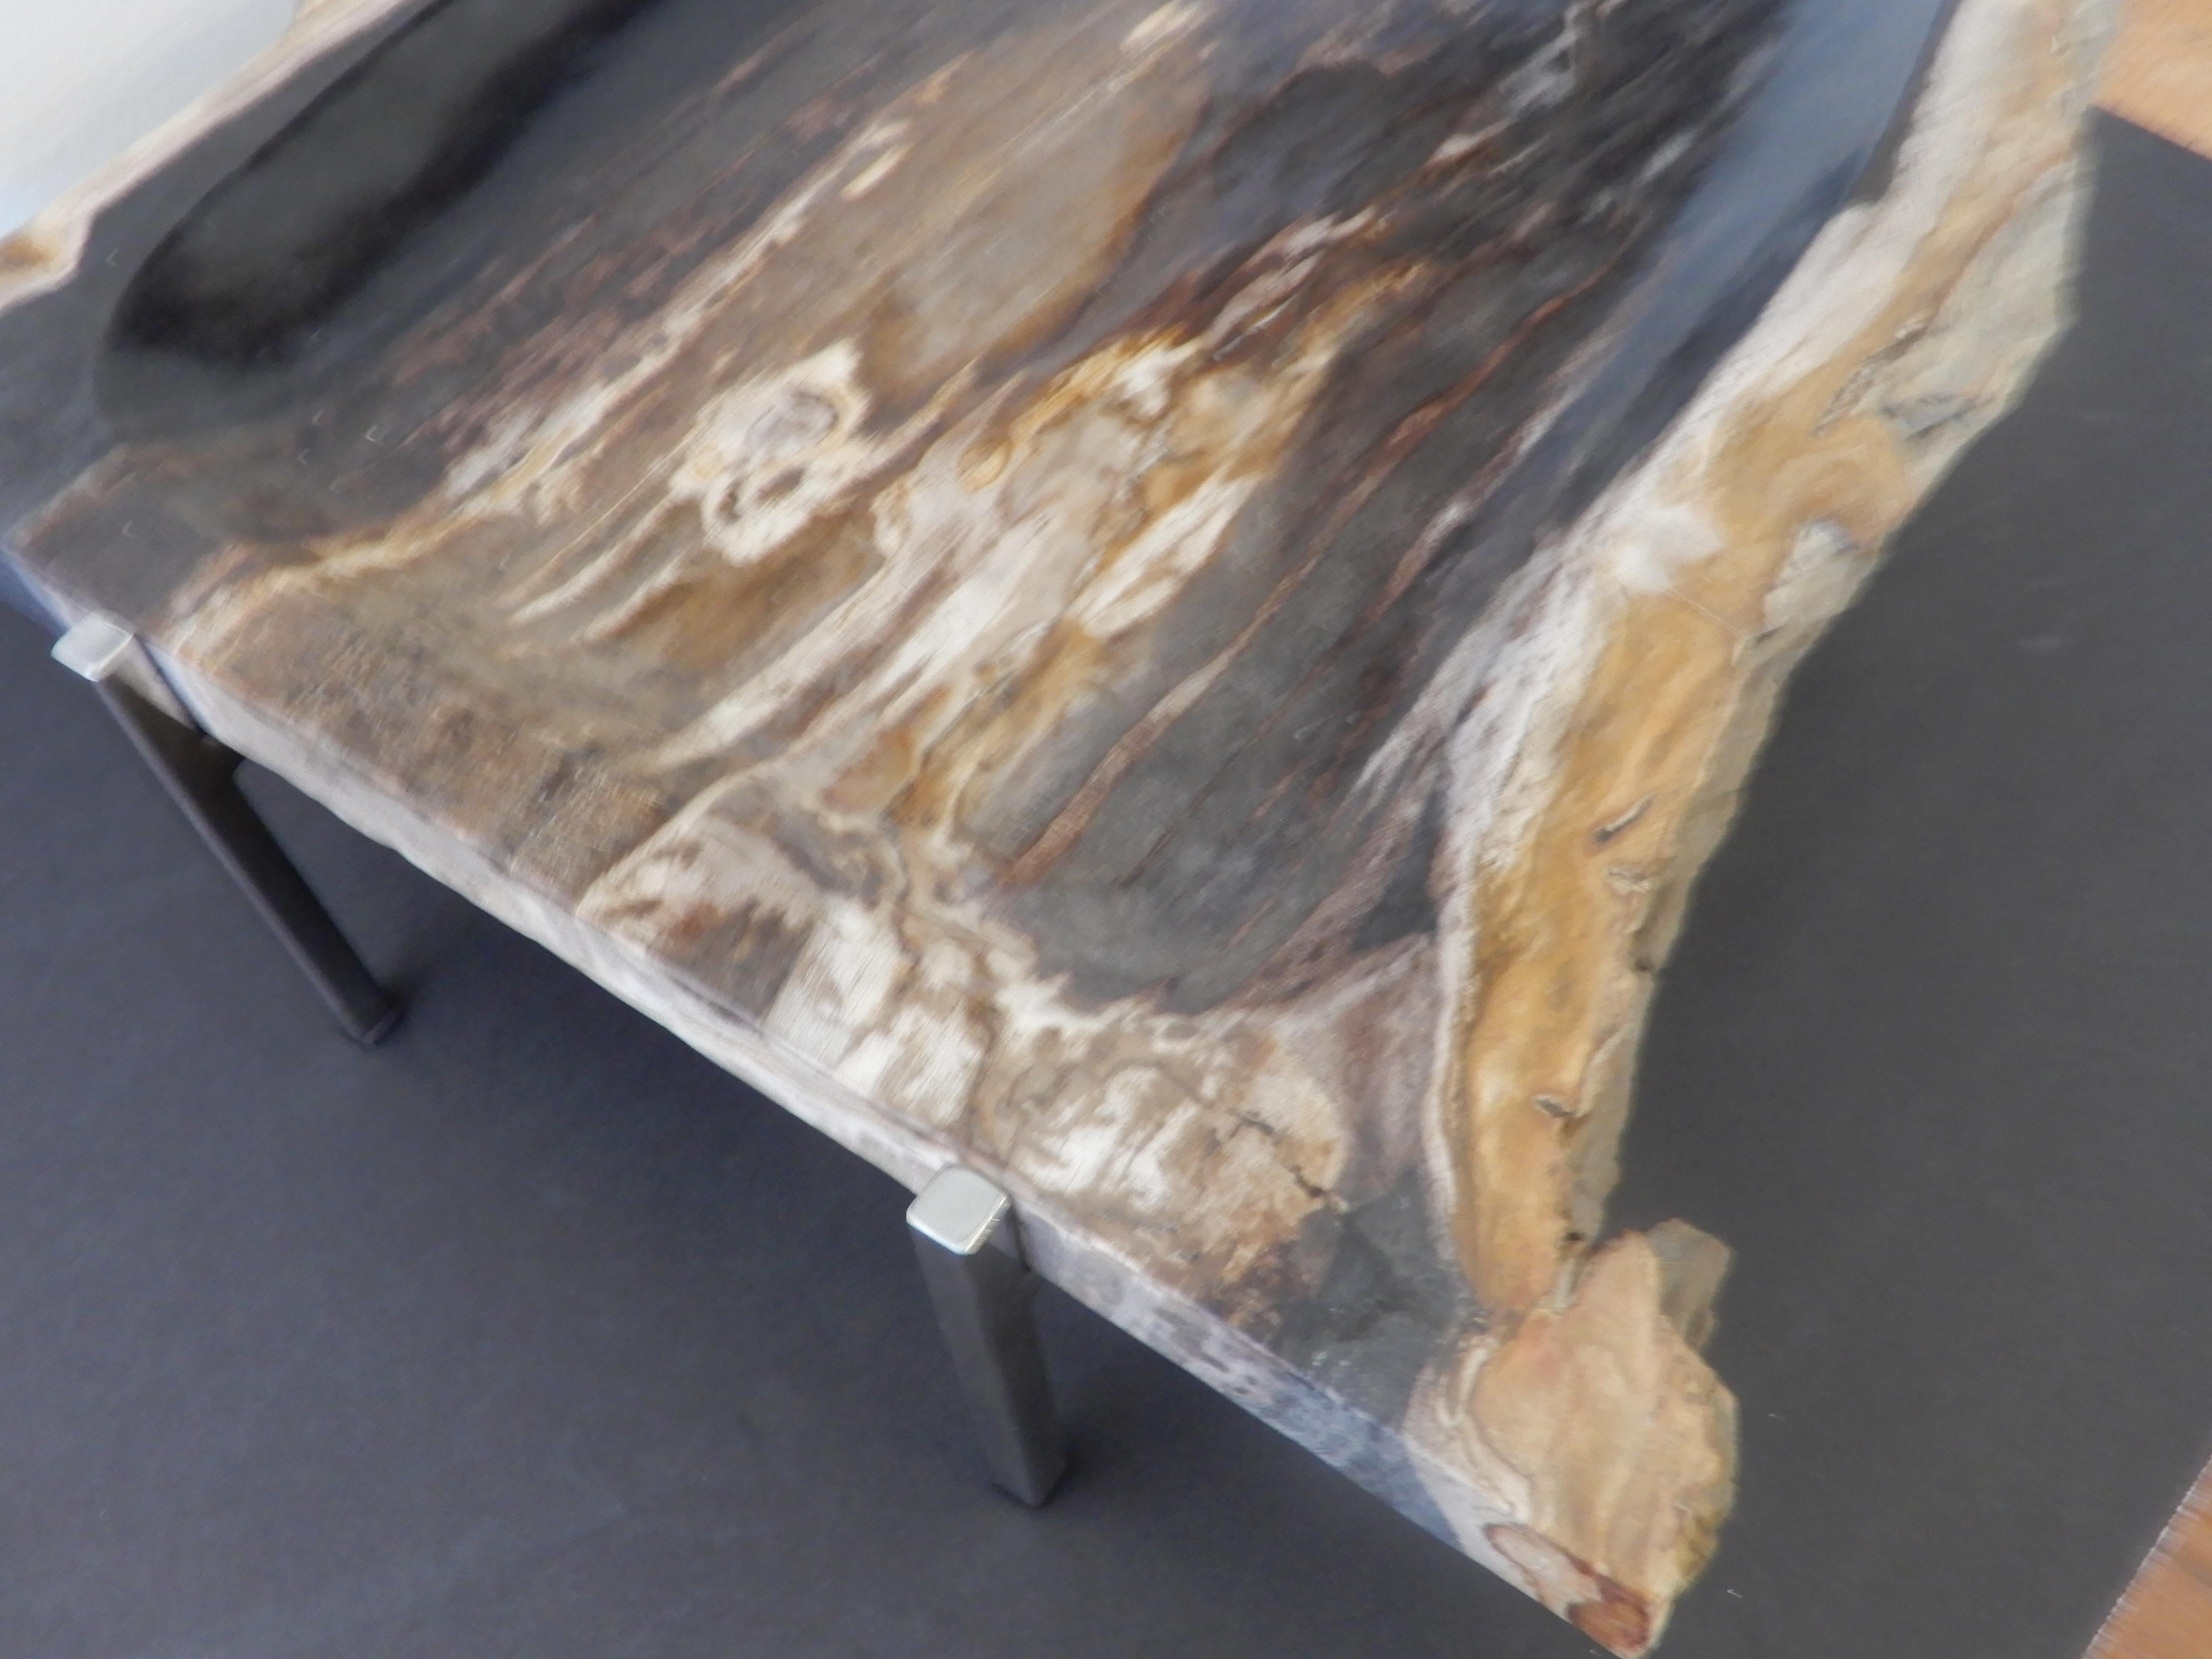 An Artisan crafted Petrified wood and chrome base serving platter or centerpiece, food safe. Natural free edge form.
Black and light woods thousands of years old(petrified) sealed.